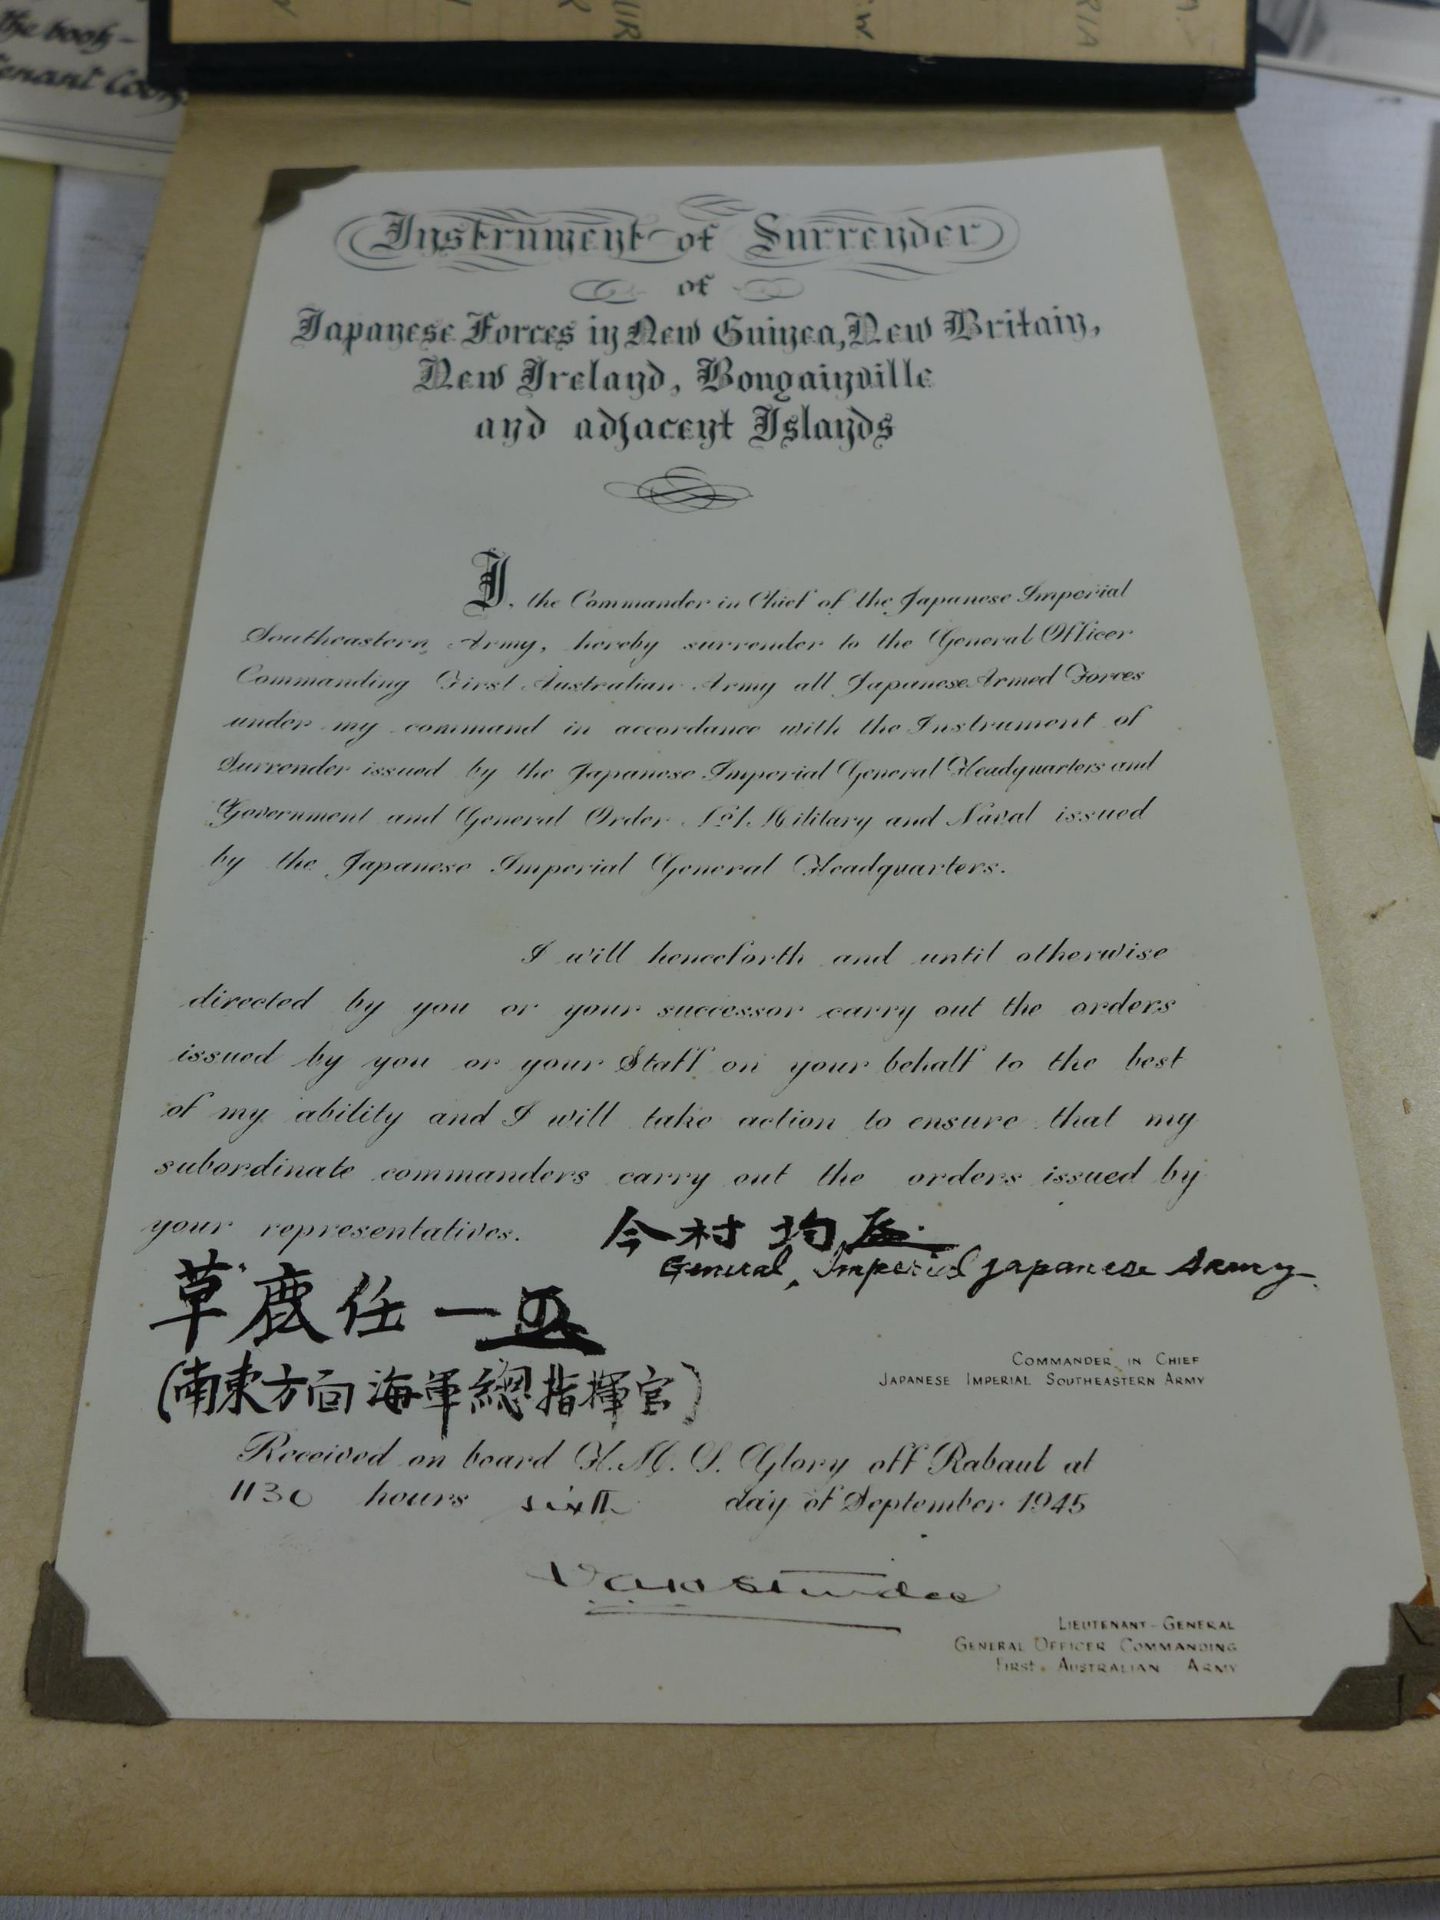 A WORLD WAR II PHOTOGRAPH ALBUM CONTAINING PHOTOGRAPHS OF THE JAPANESE SIGNING OF THE INSTRUMENT - Image 8 of 9